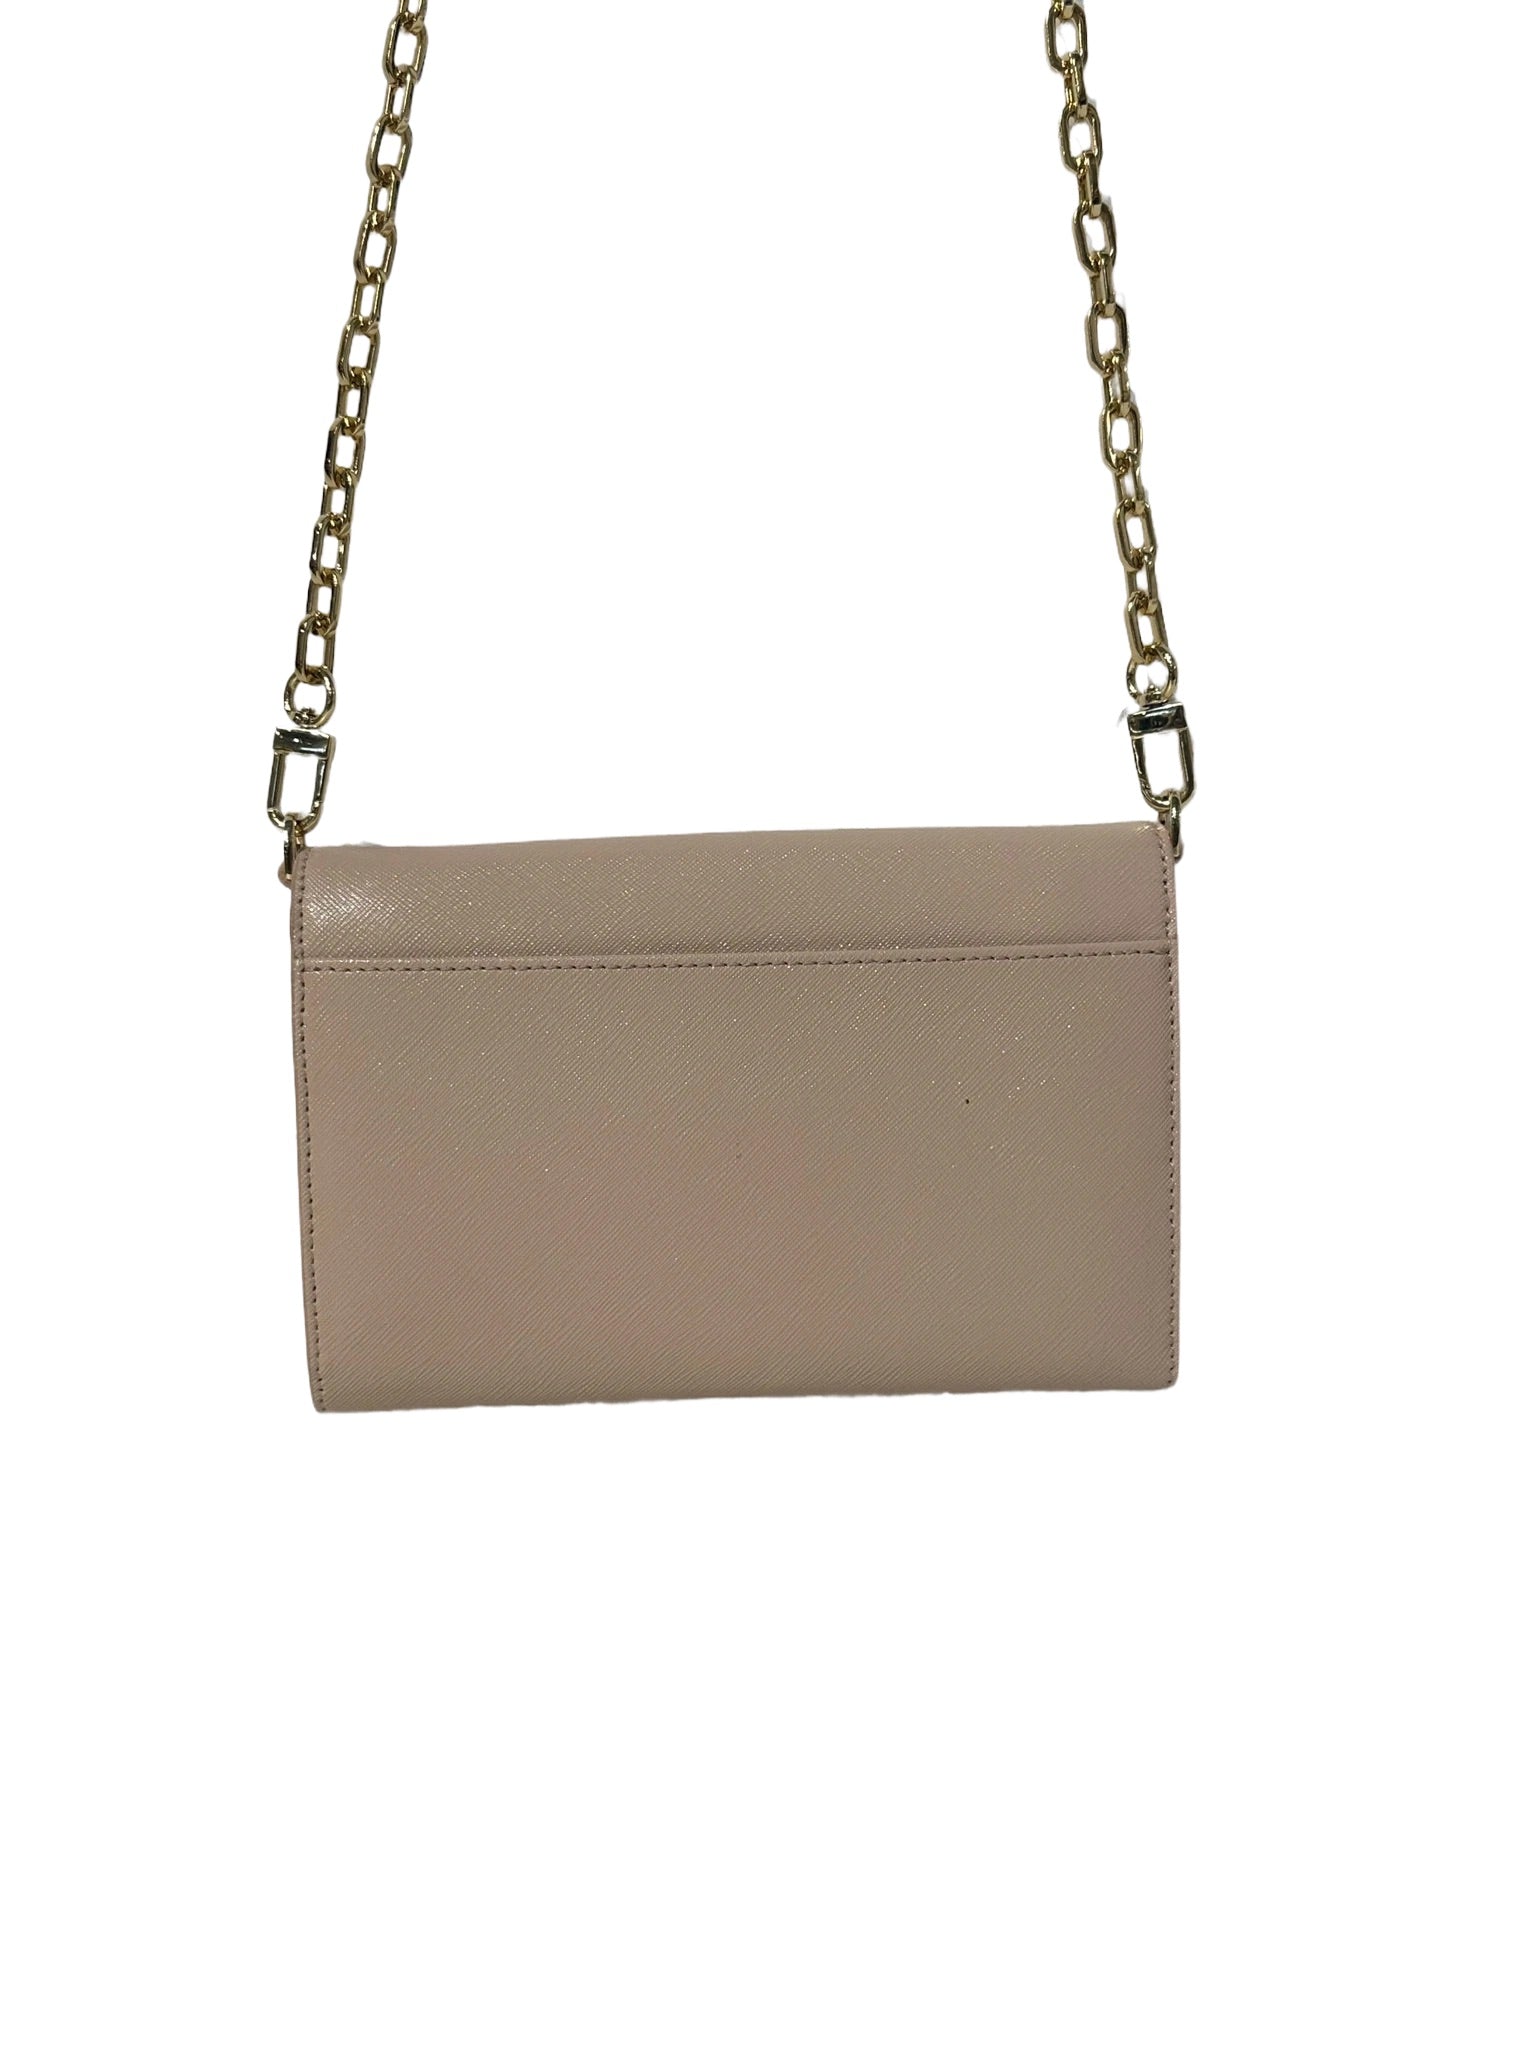 Blush Pink Shimer Crossbody with Gold Chain